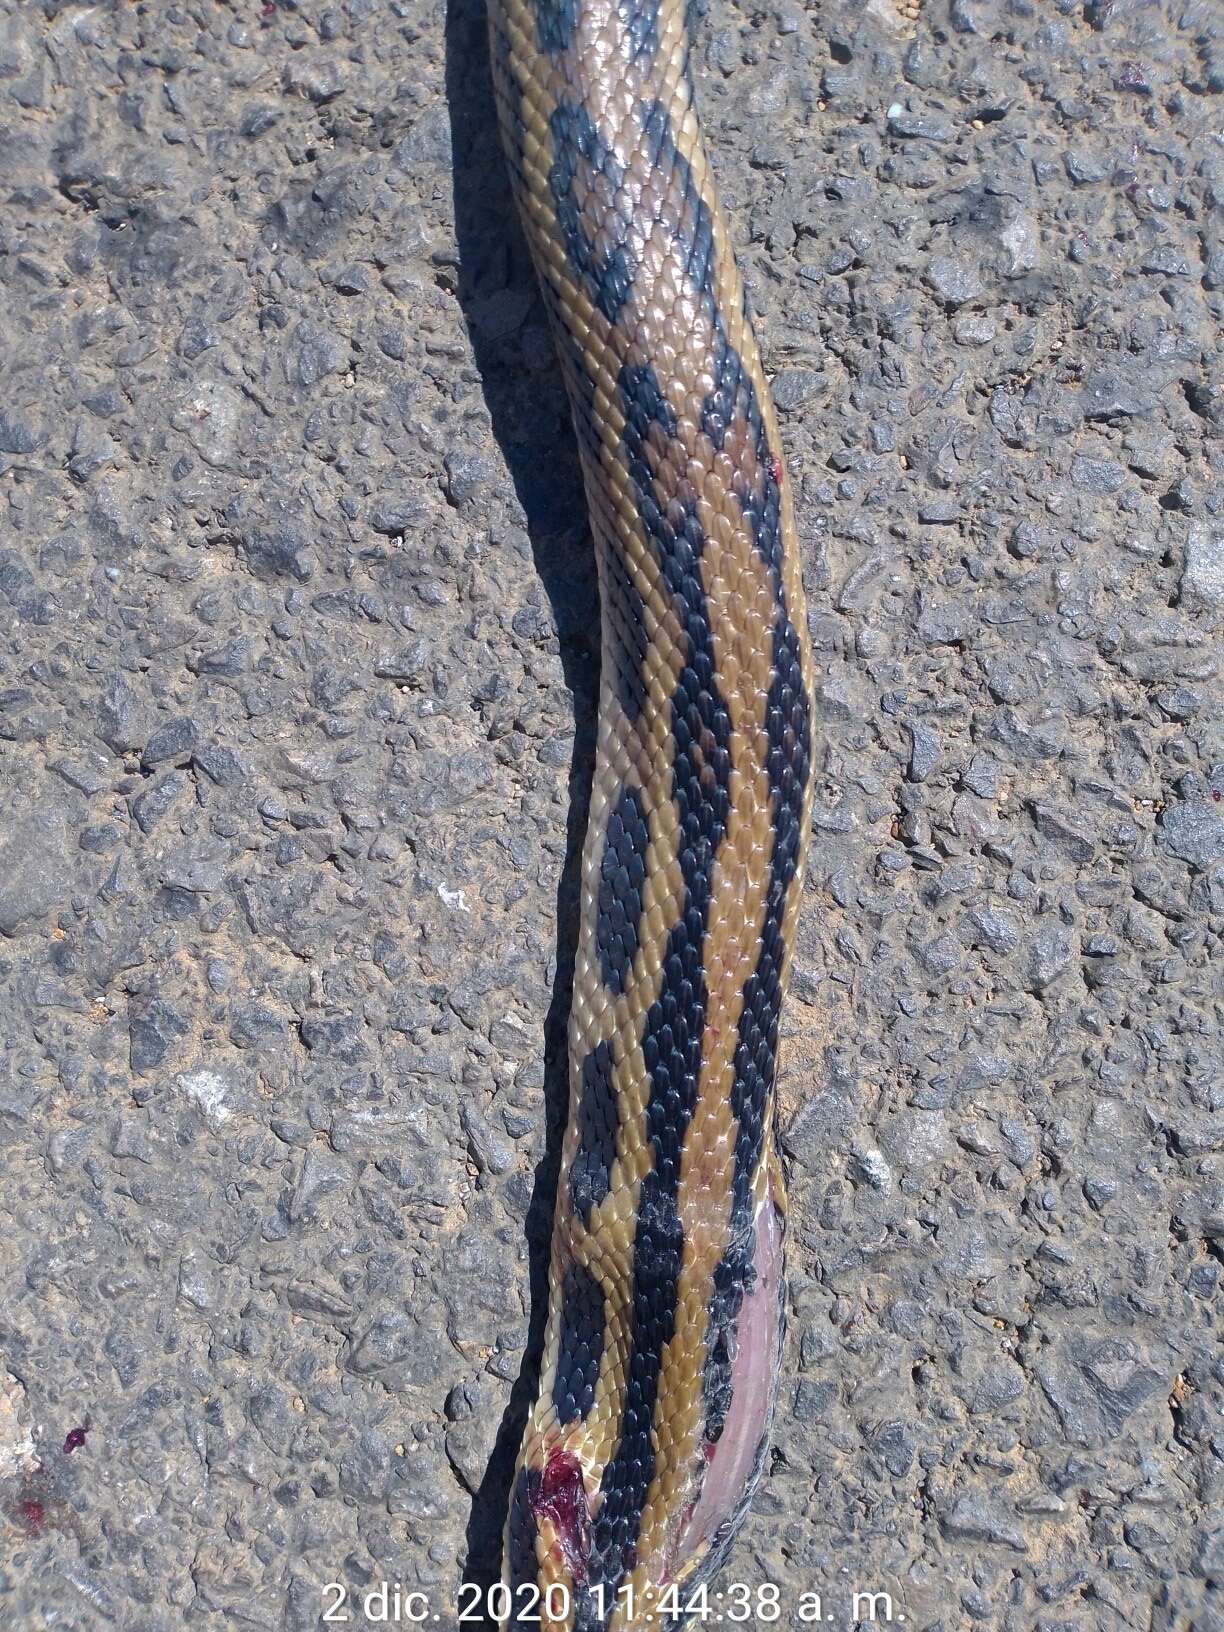 Image of Middle American Gopher Snake